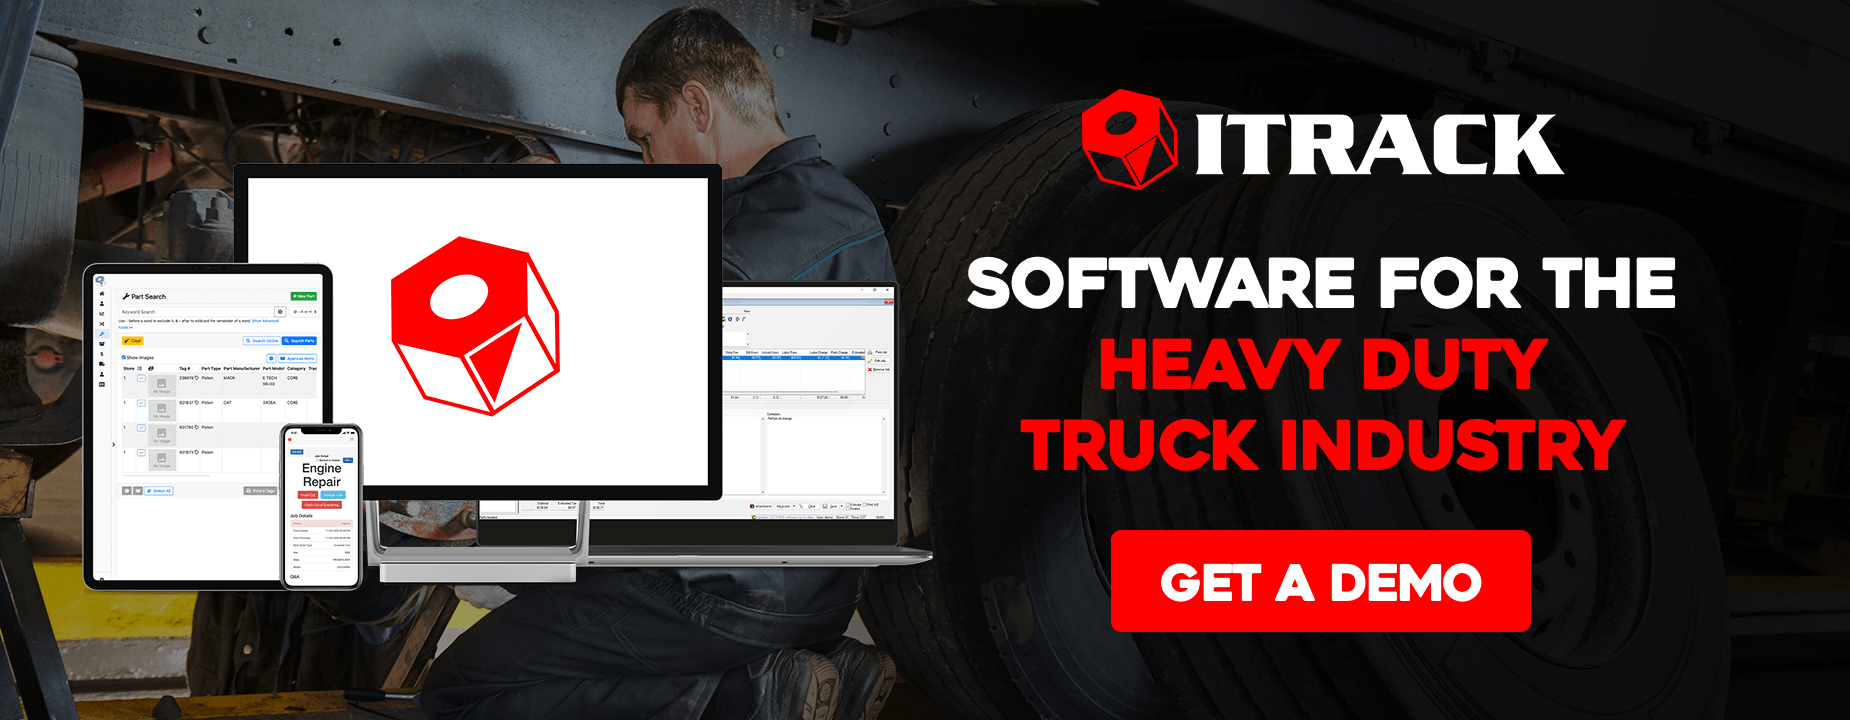 Schedule a demo - ITrack software